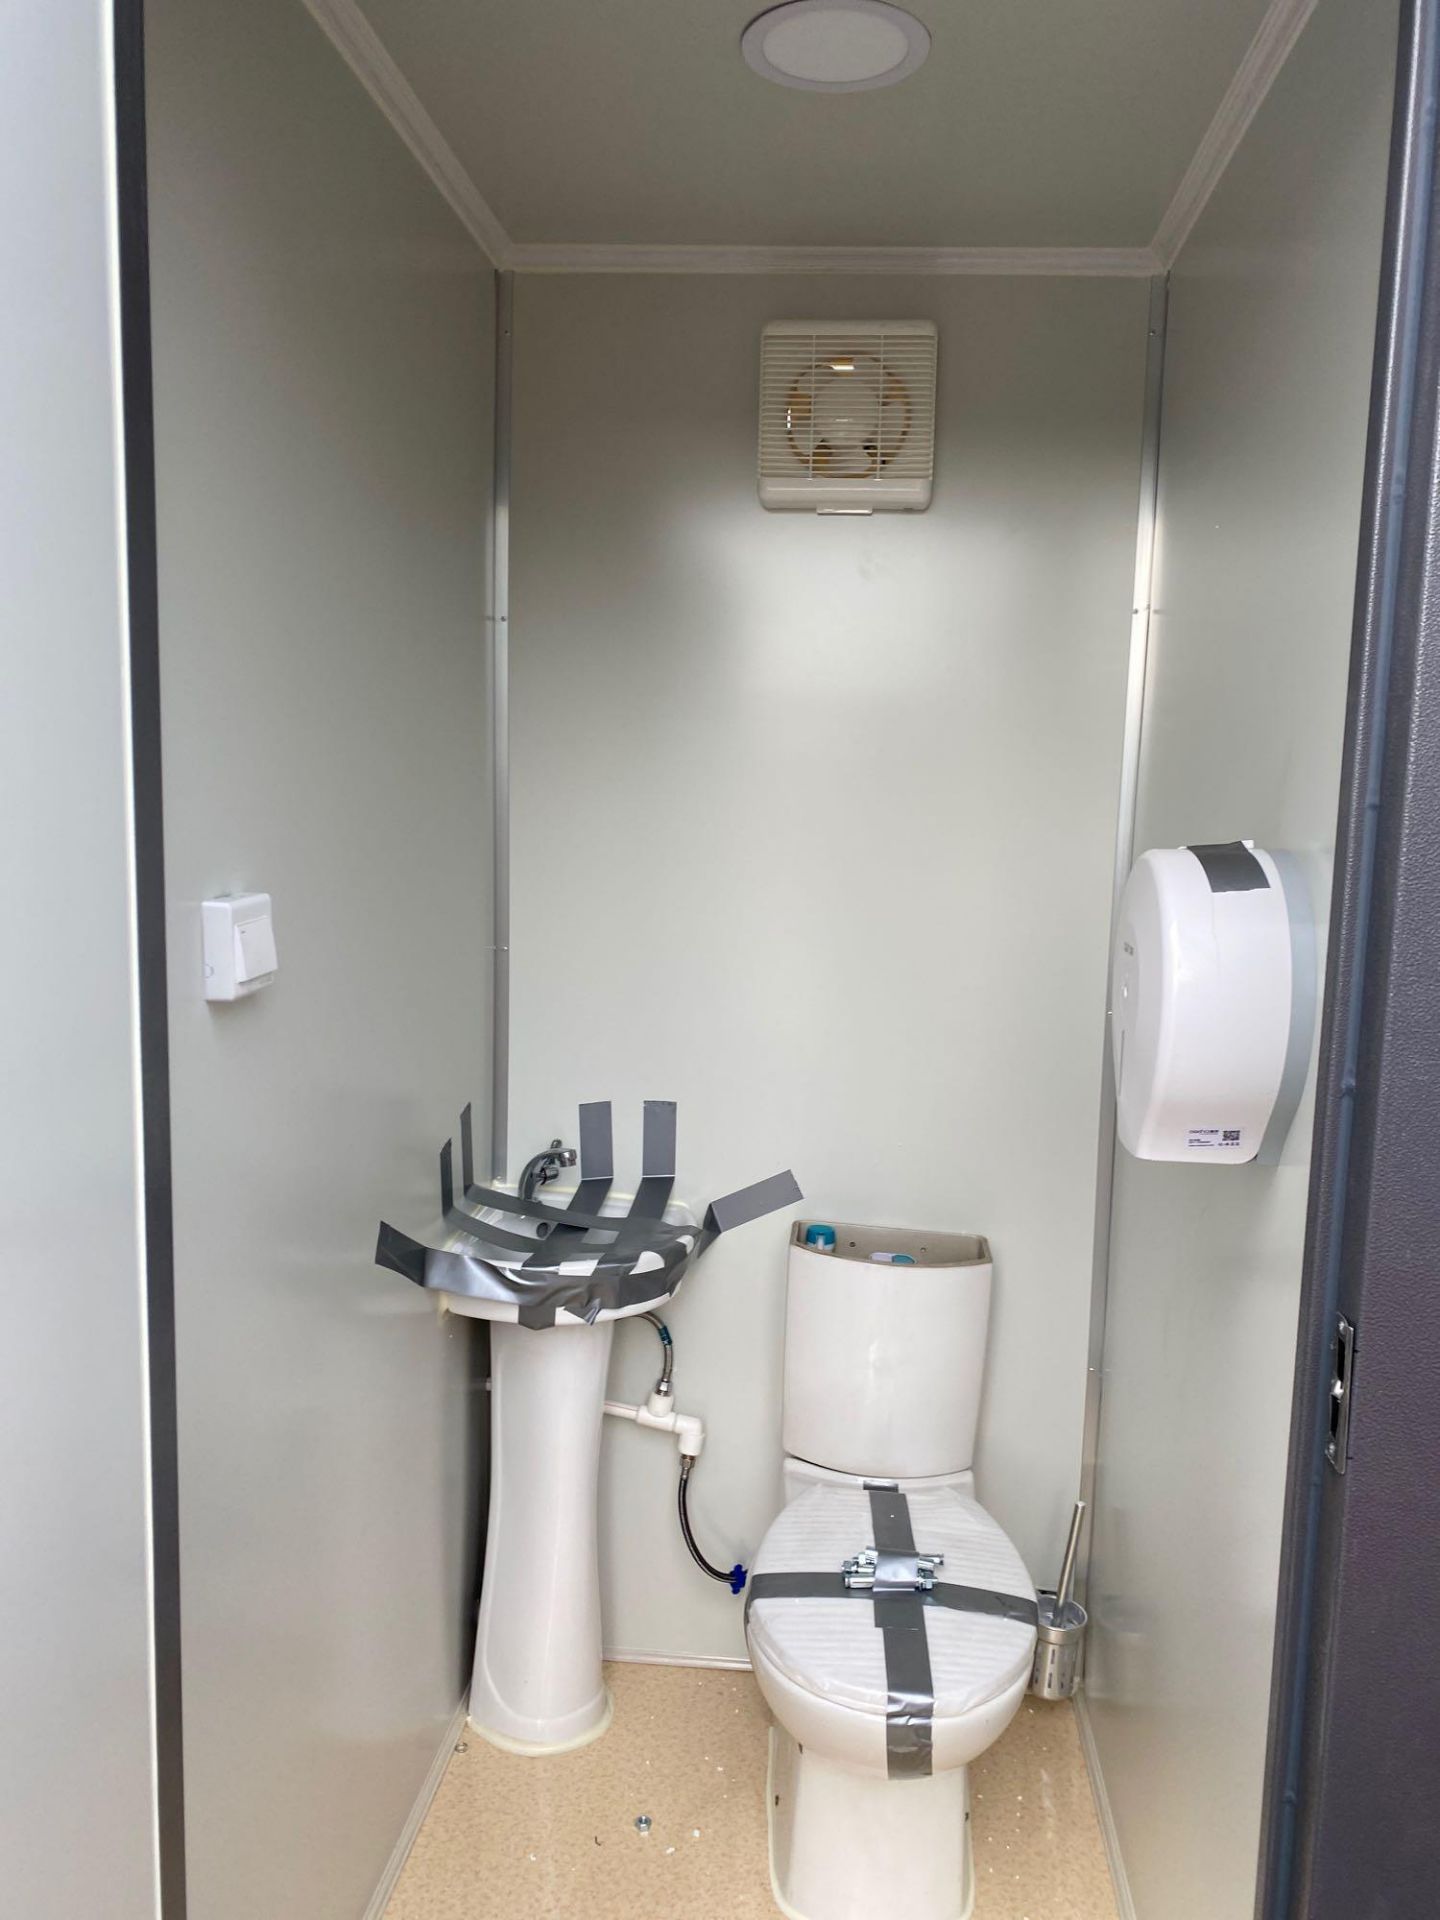 UNUSED PORTABLE 2 STALL BATHROOM UNIT. PLUMBING AND ELECTRIC HOOKUP, FORK POCKETS - Image 6 of 6